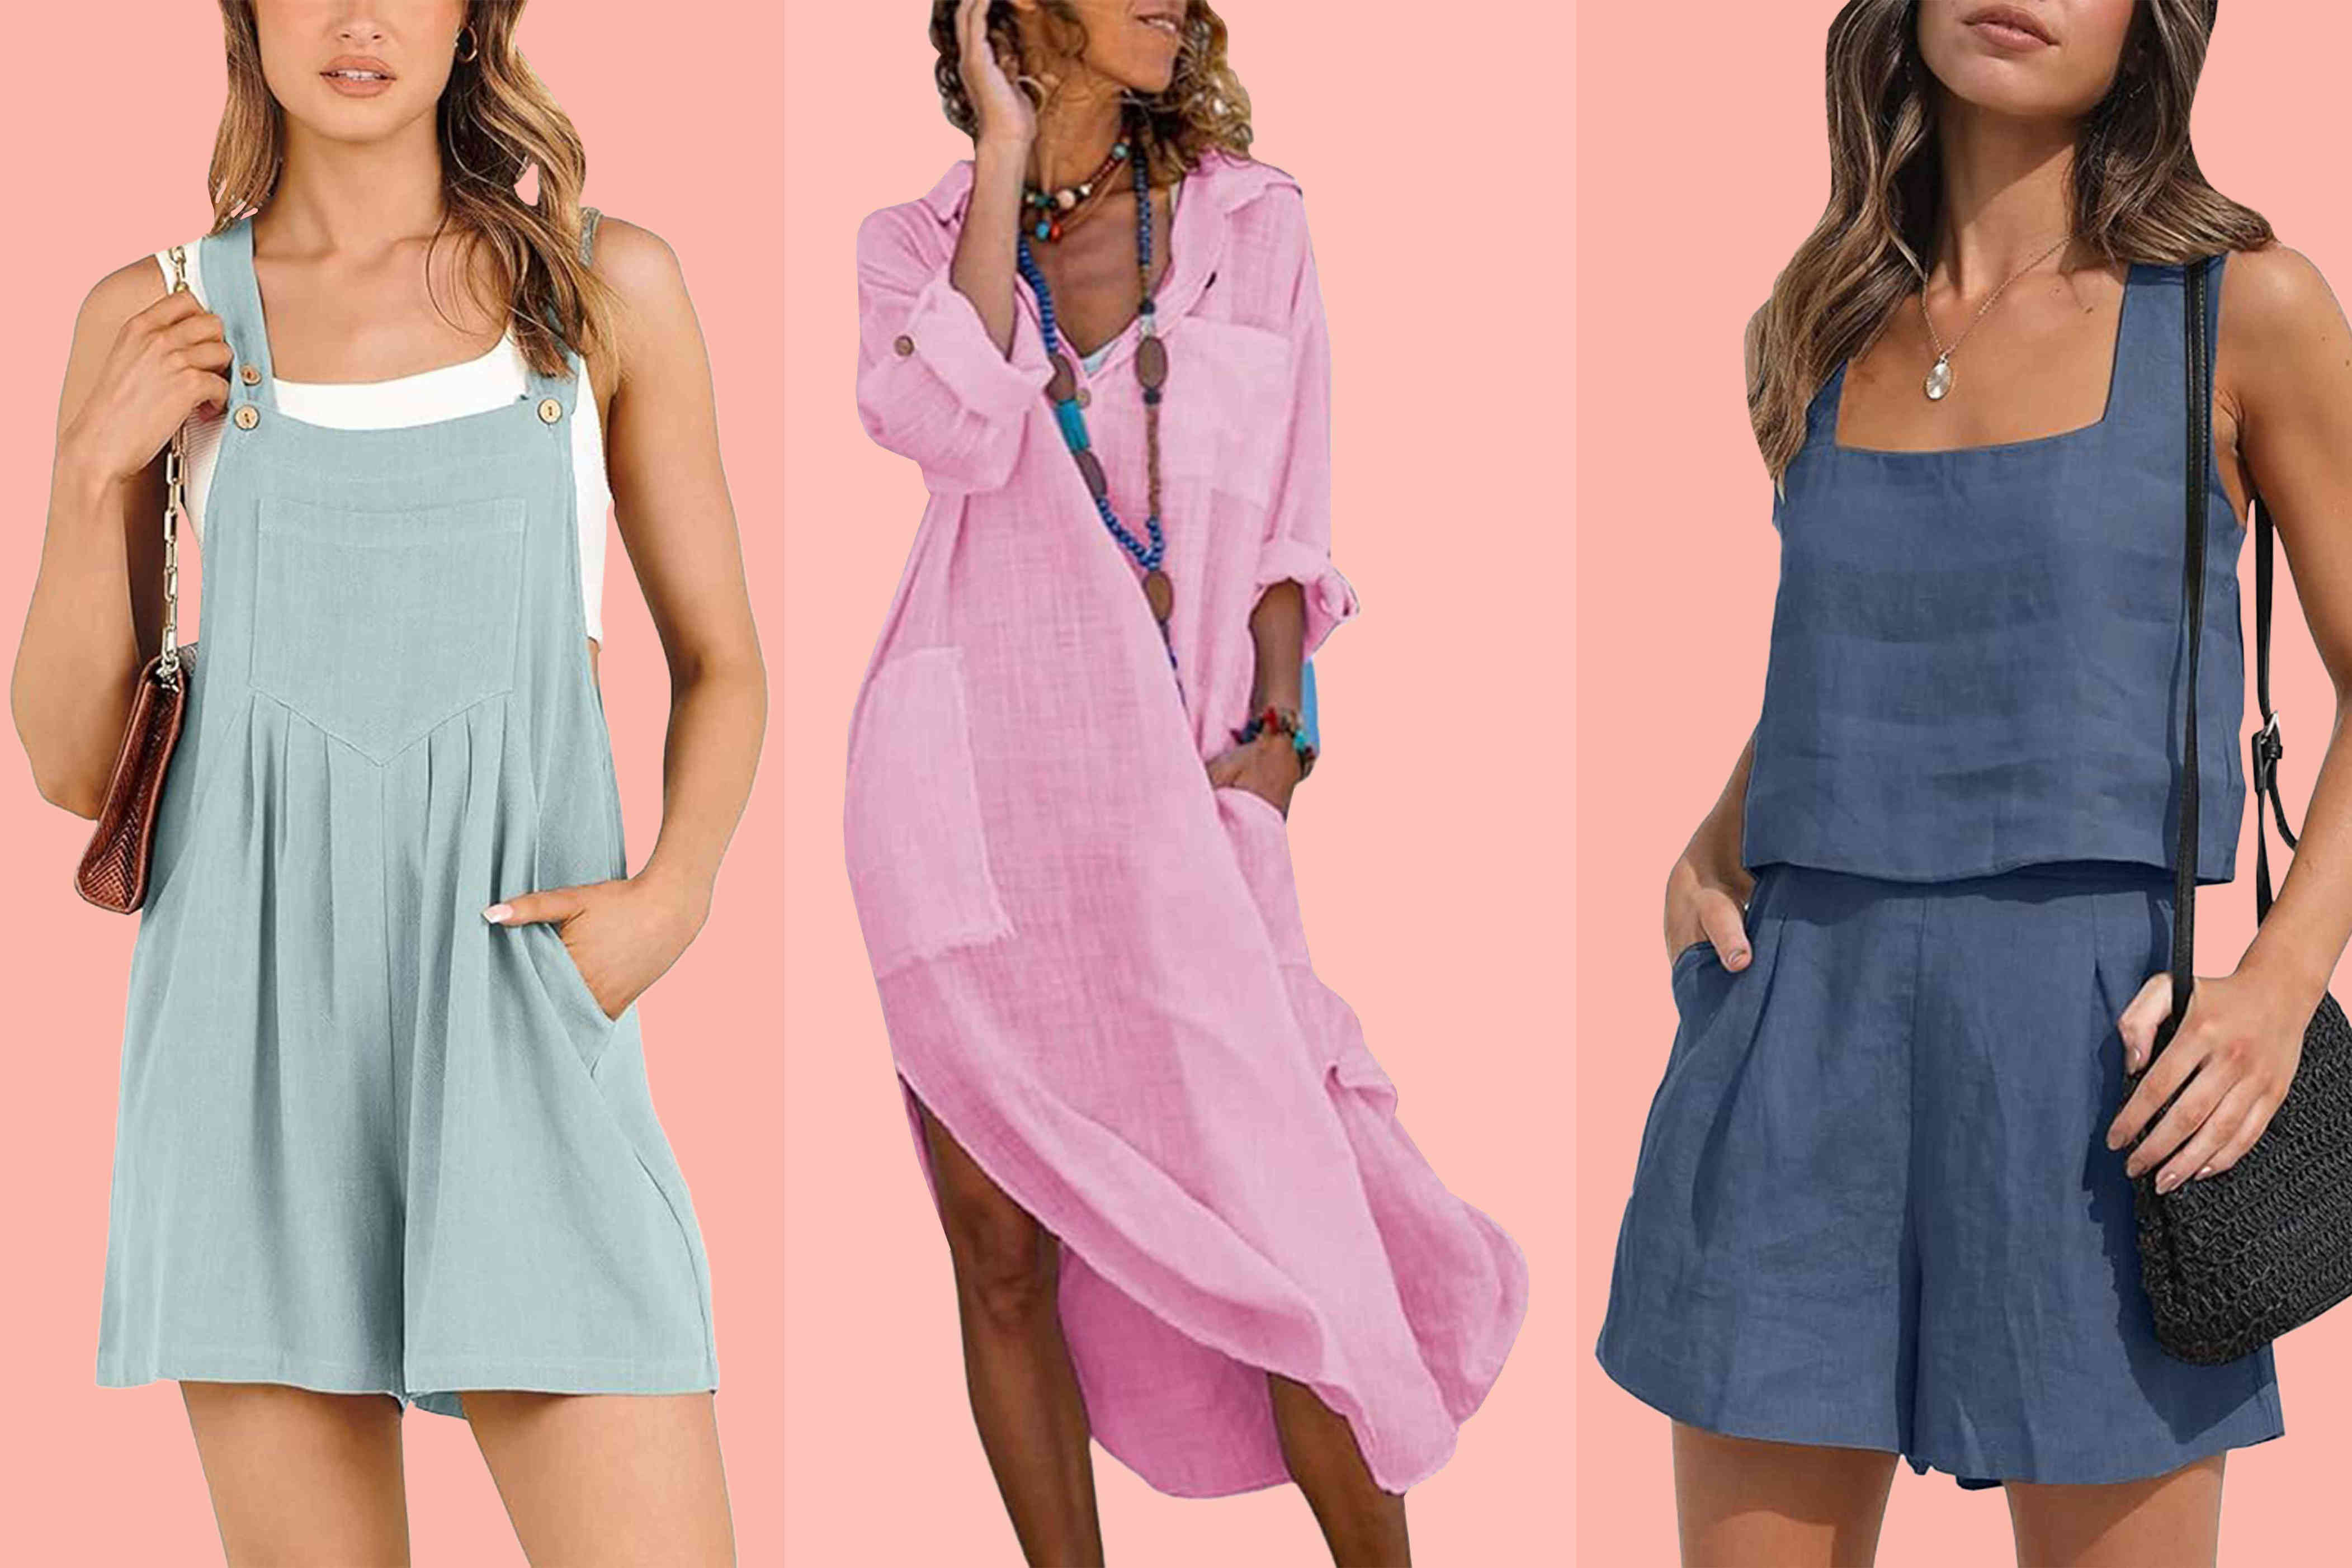 amazon, 10 lightweight and flowy linen pieces you need in your wardrobe this summer—all under $30 on amazon